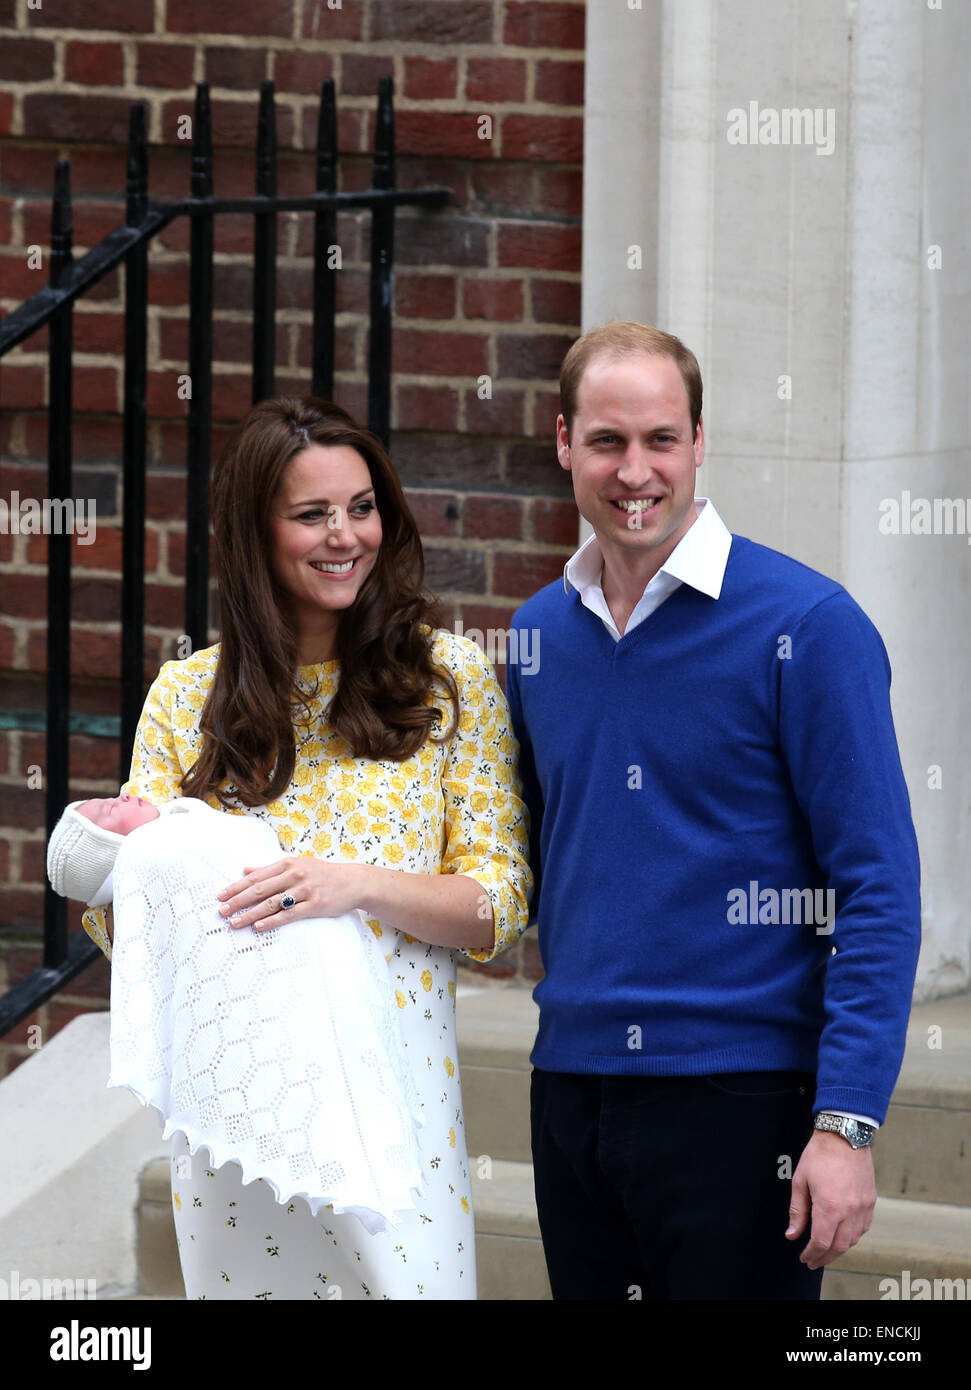 London, UK. 2nd May, 2015. The newborn baby girl makes her first appearance to the public with the Duke of Cambridge and the Duchess outside St. Mary's Hospital in London, on May 2, 2015. Credit:  Han Yan/Xinhua/Alamy Live News Stock Photo